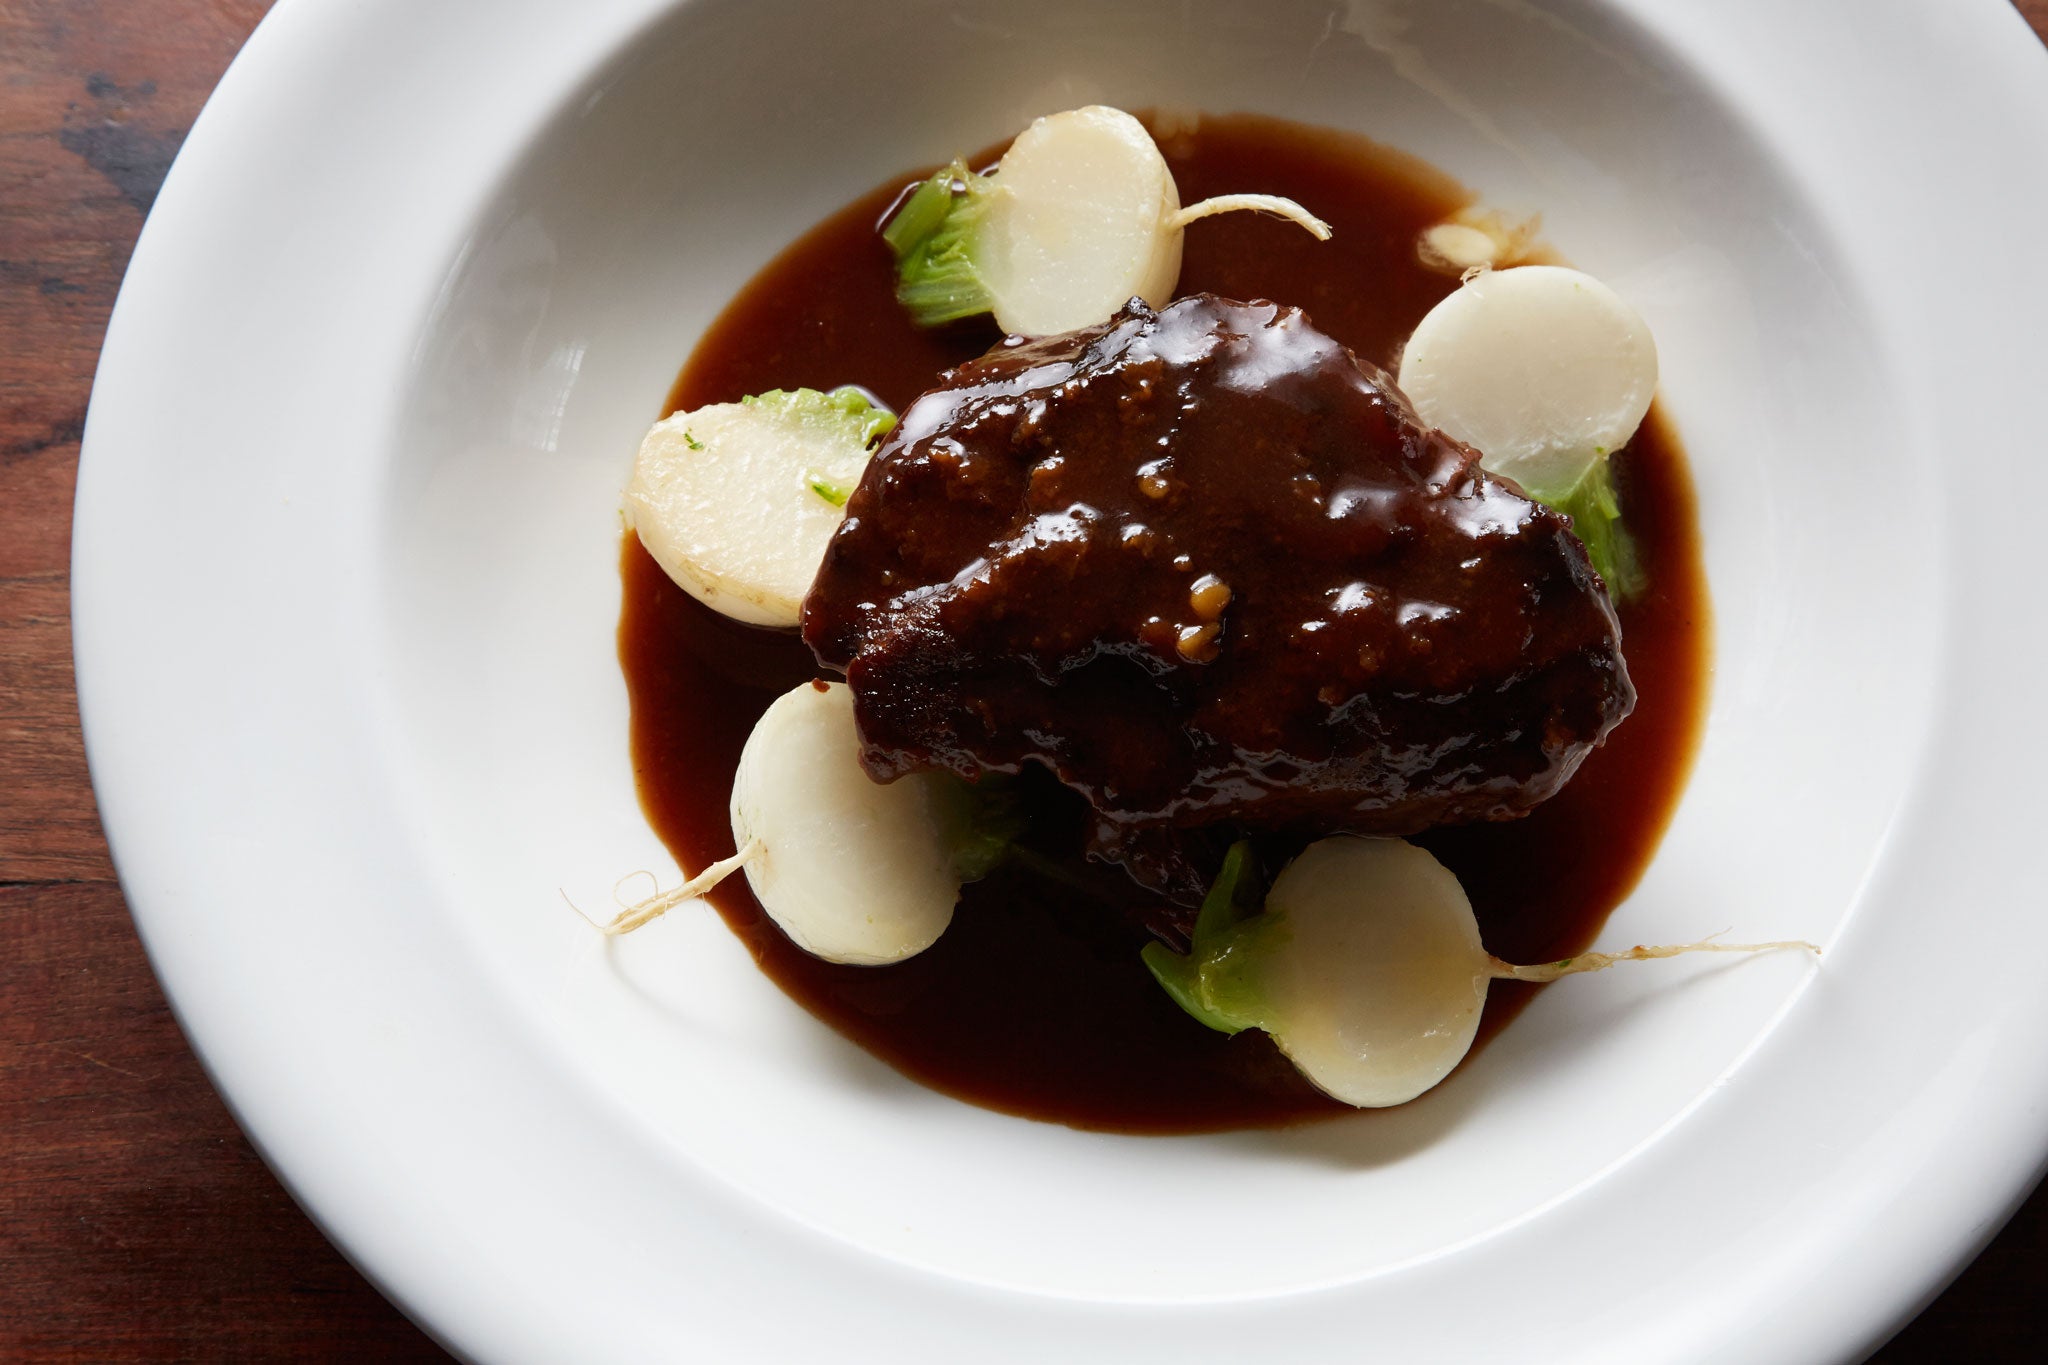 Braised Ox cheeks with port and turnips